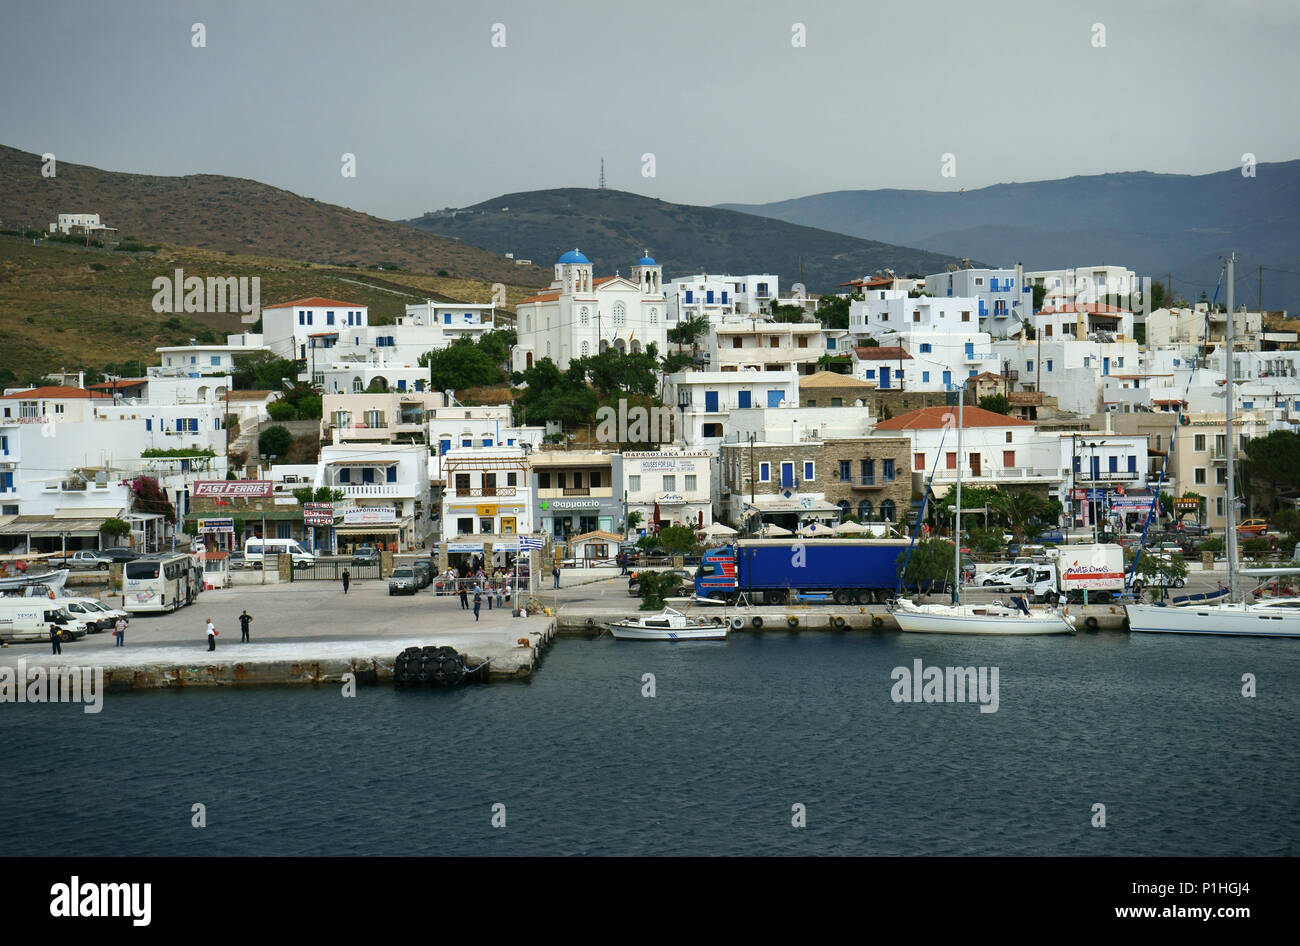 Town Gavrio seen from ferry, Island Andros, Cyclades islands, Greece Stock Photo